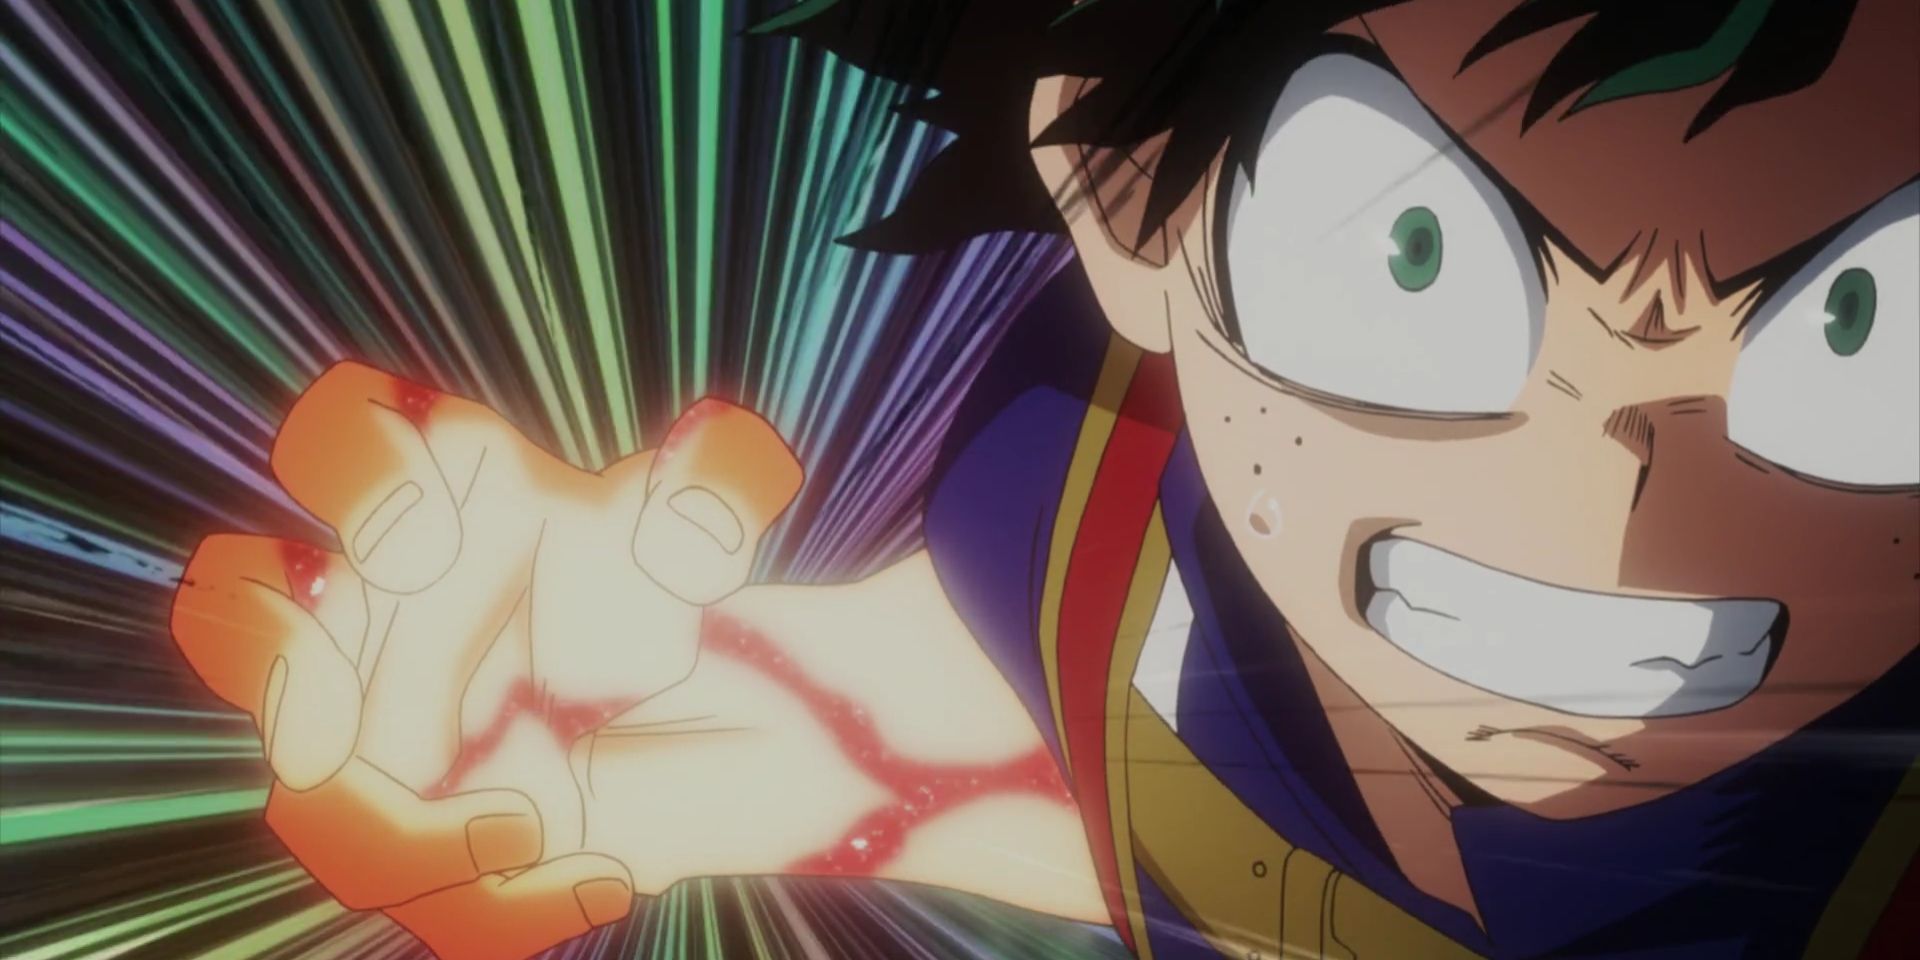 Deku Midoriya uses One For All Quirk to punch in My Hero Academia.